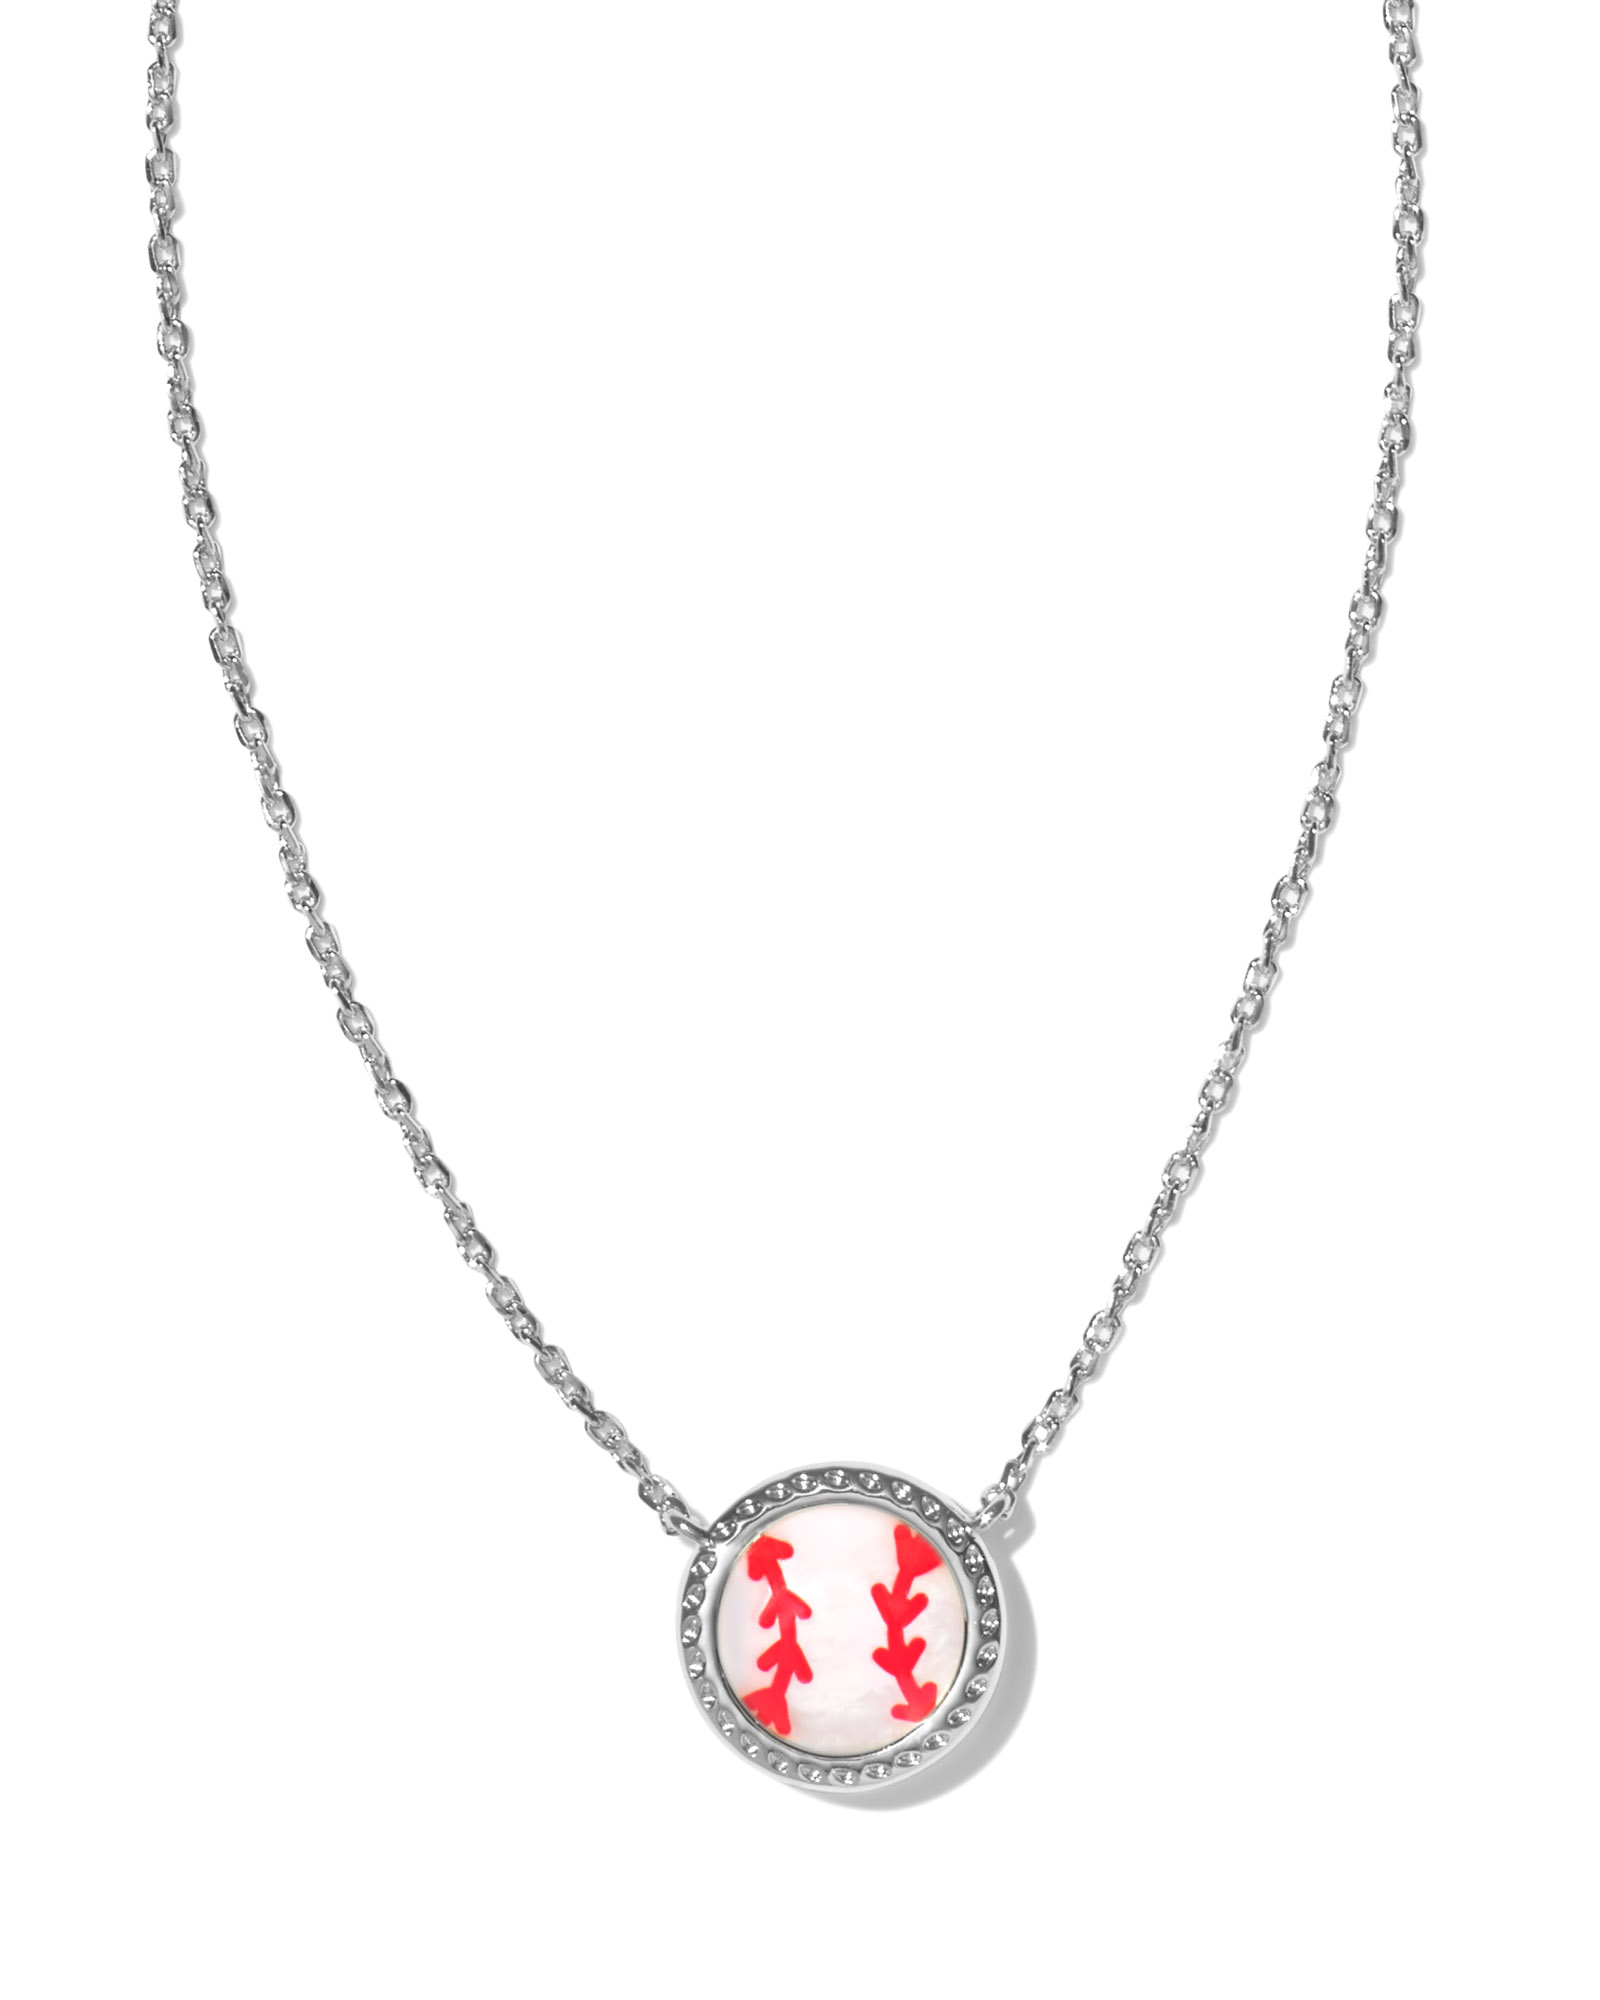 CC Sport Gold Baseball Charm Necklace by Chelsea Charles | Chelsea Charles  Jewelry